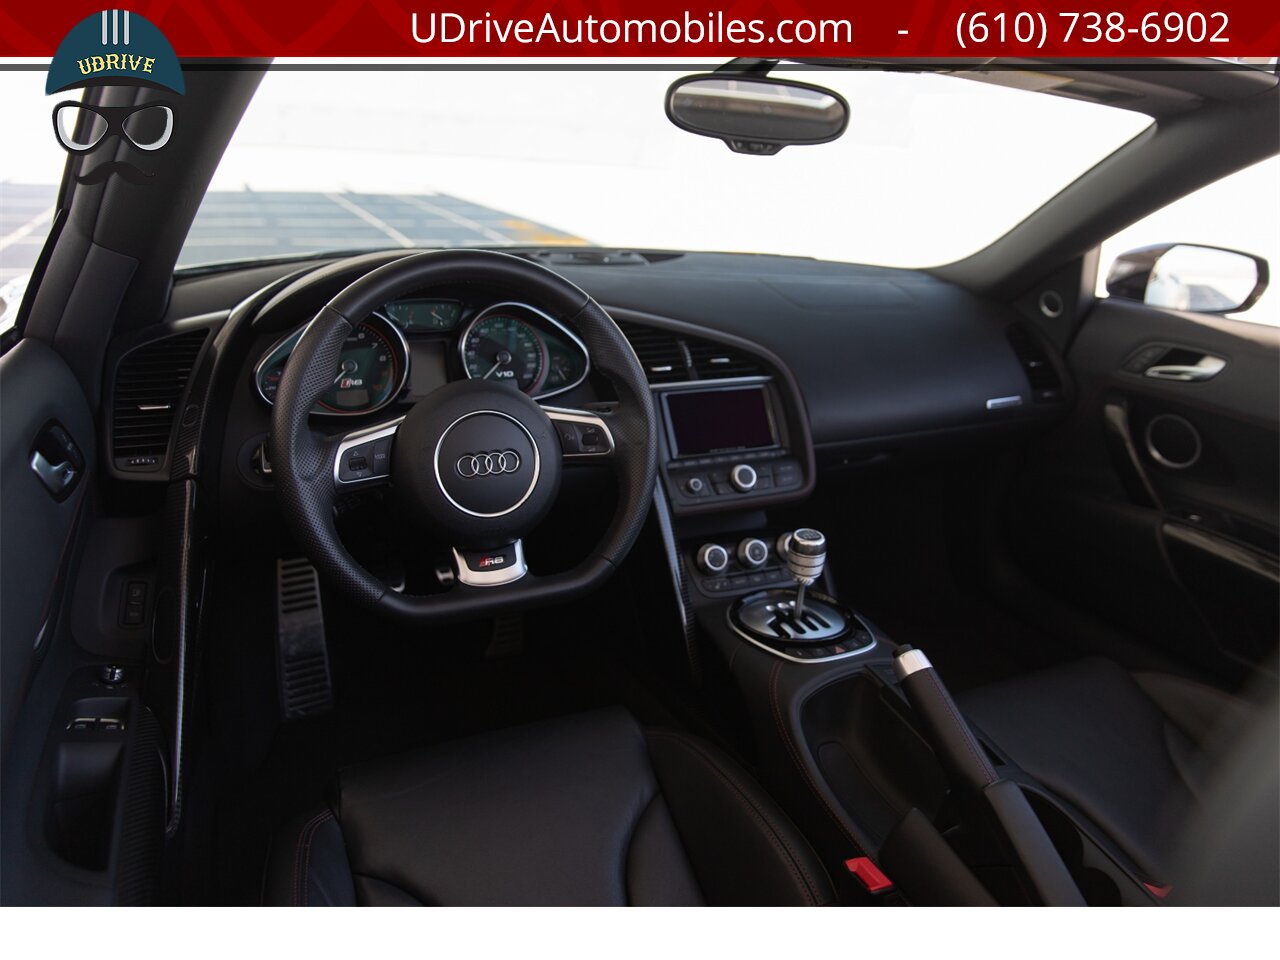 2014 Audi R8 5.2 V10 Quattro Spyder 6 Speed Manual 2k Miles  Extremely RARE 1 of 1 Color Combo - Photo 5 - West Chester, PA 19382